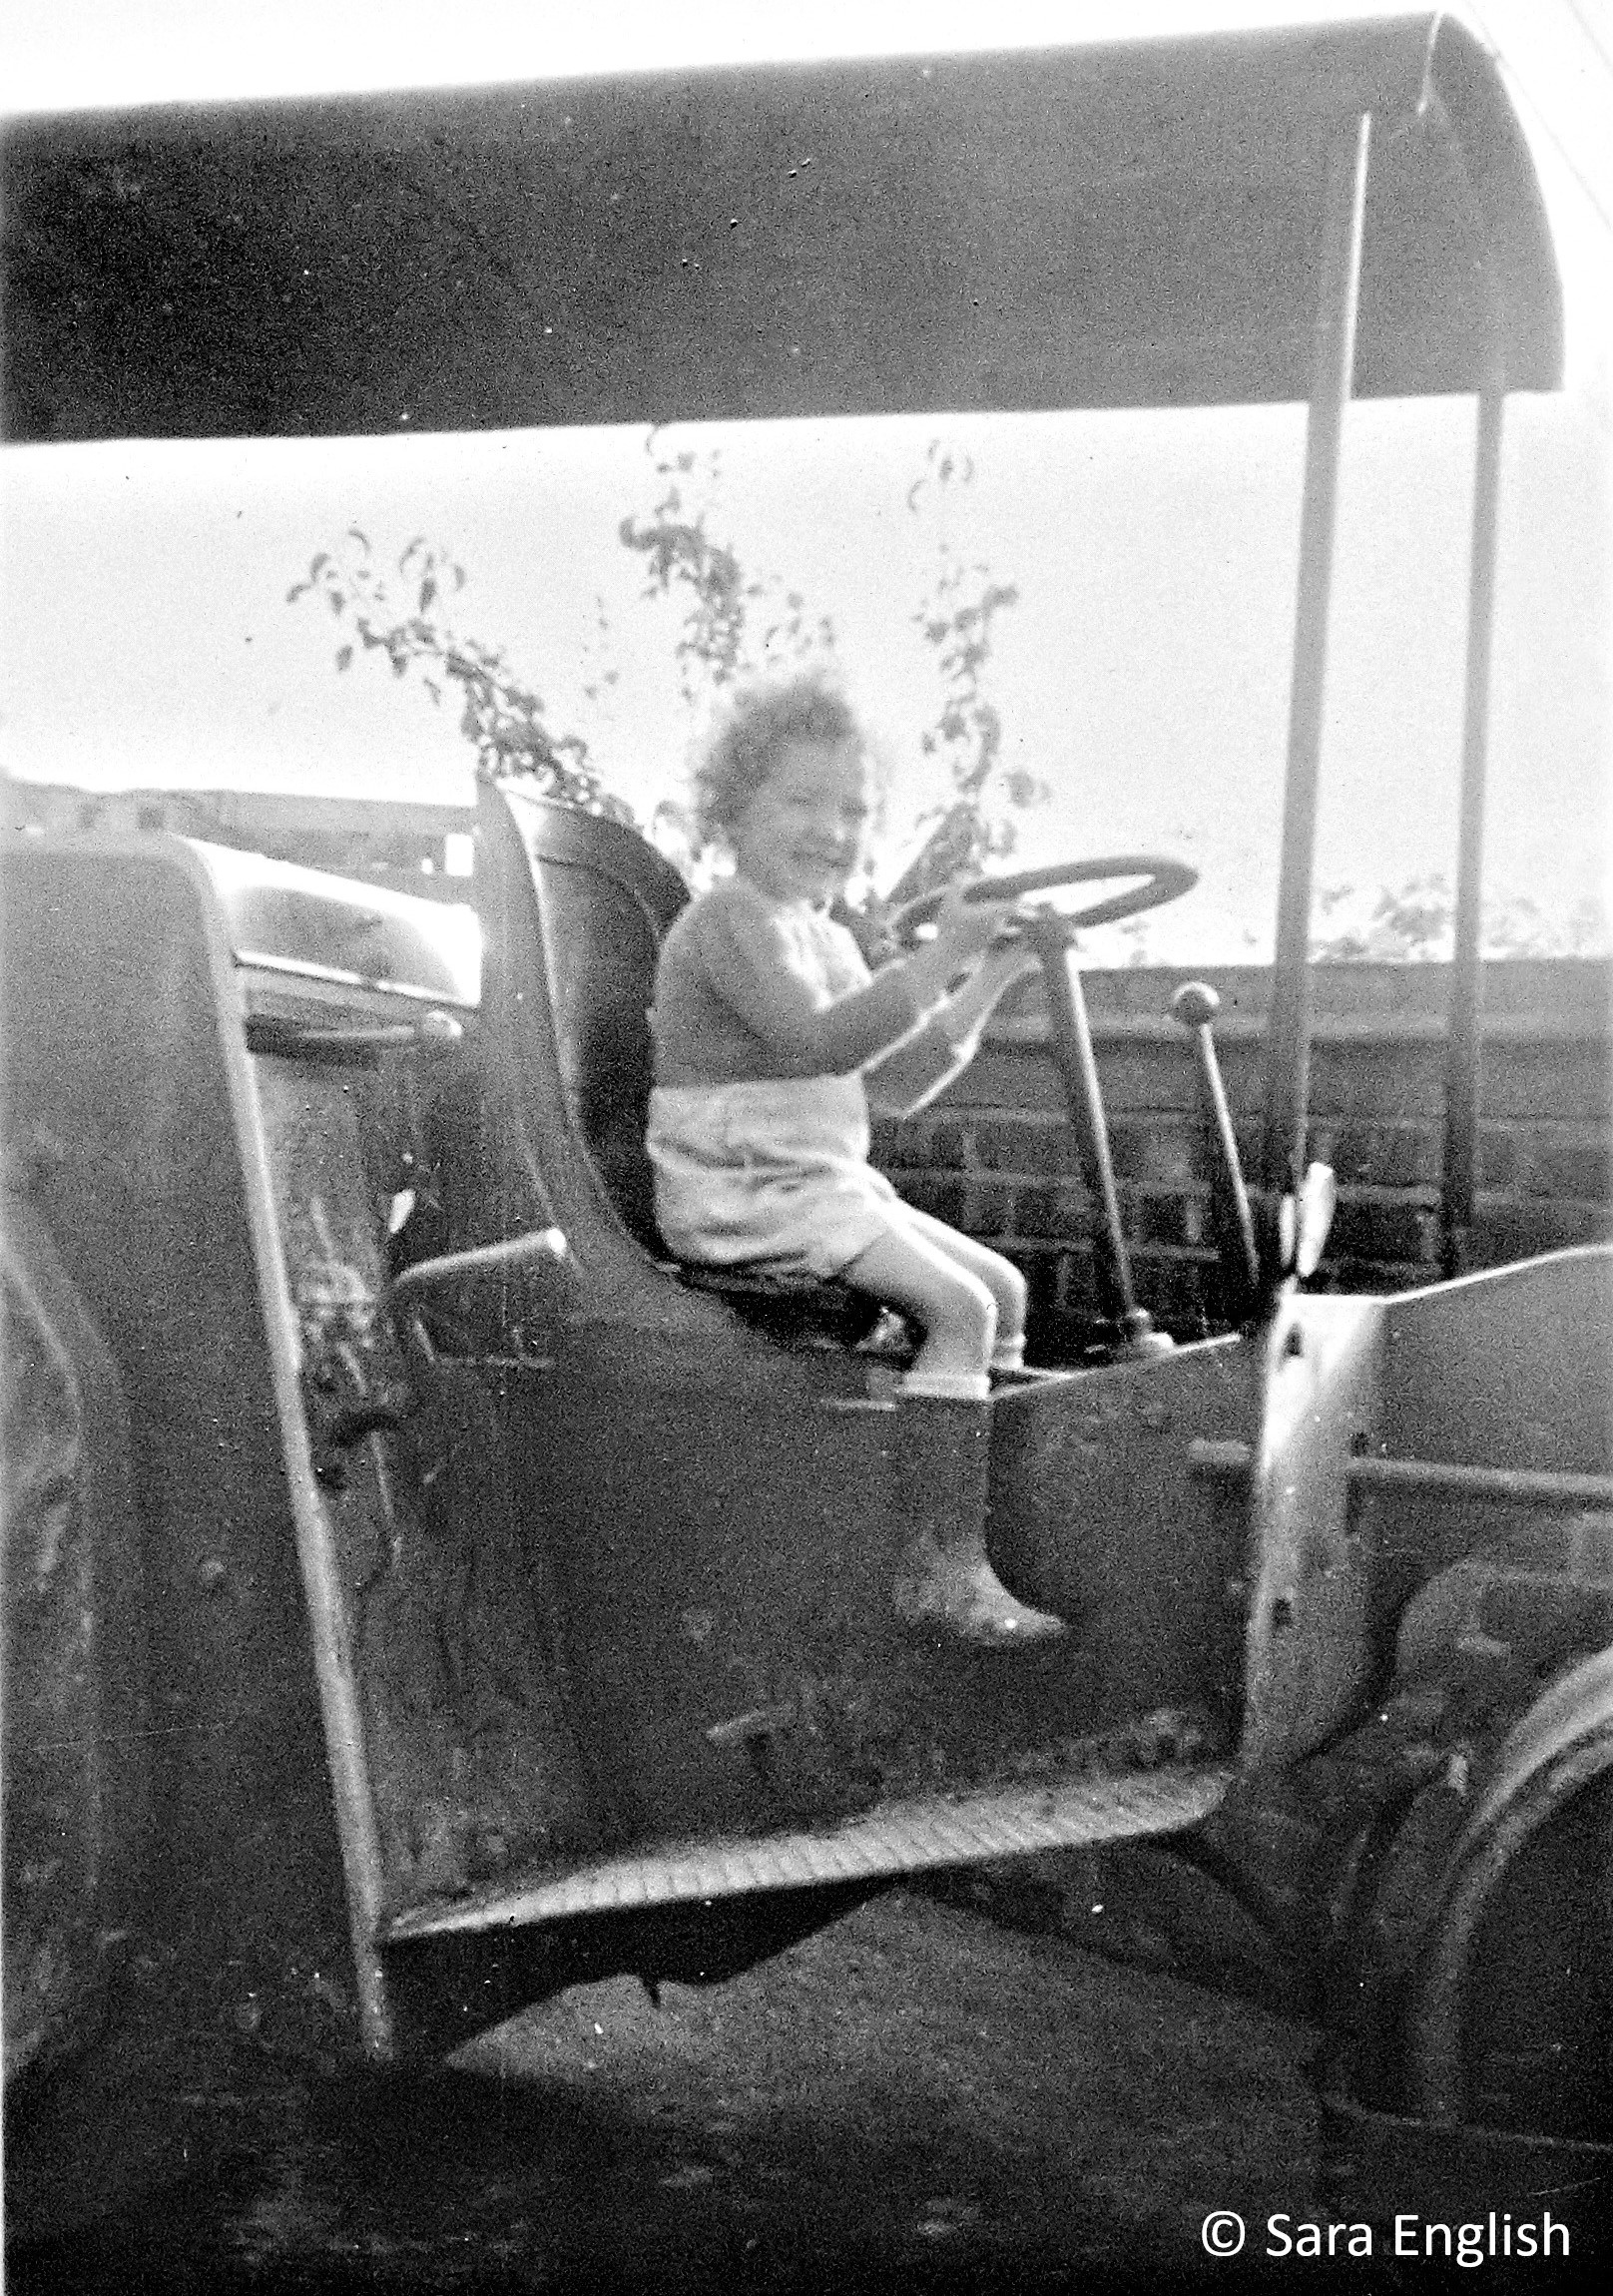 Child in vehicle